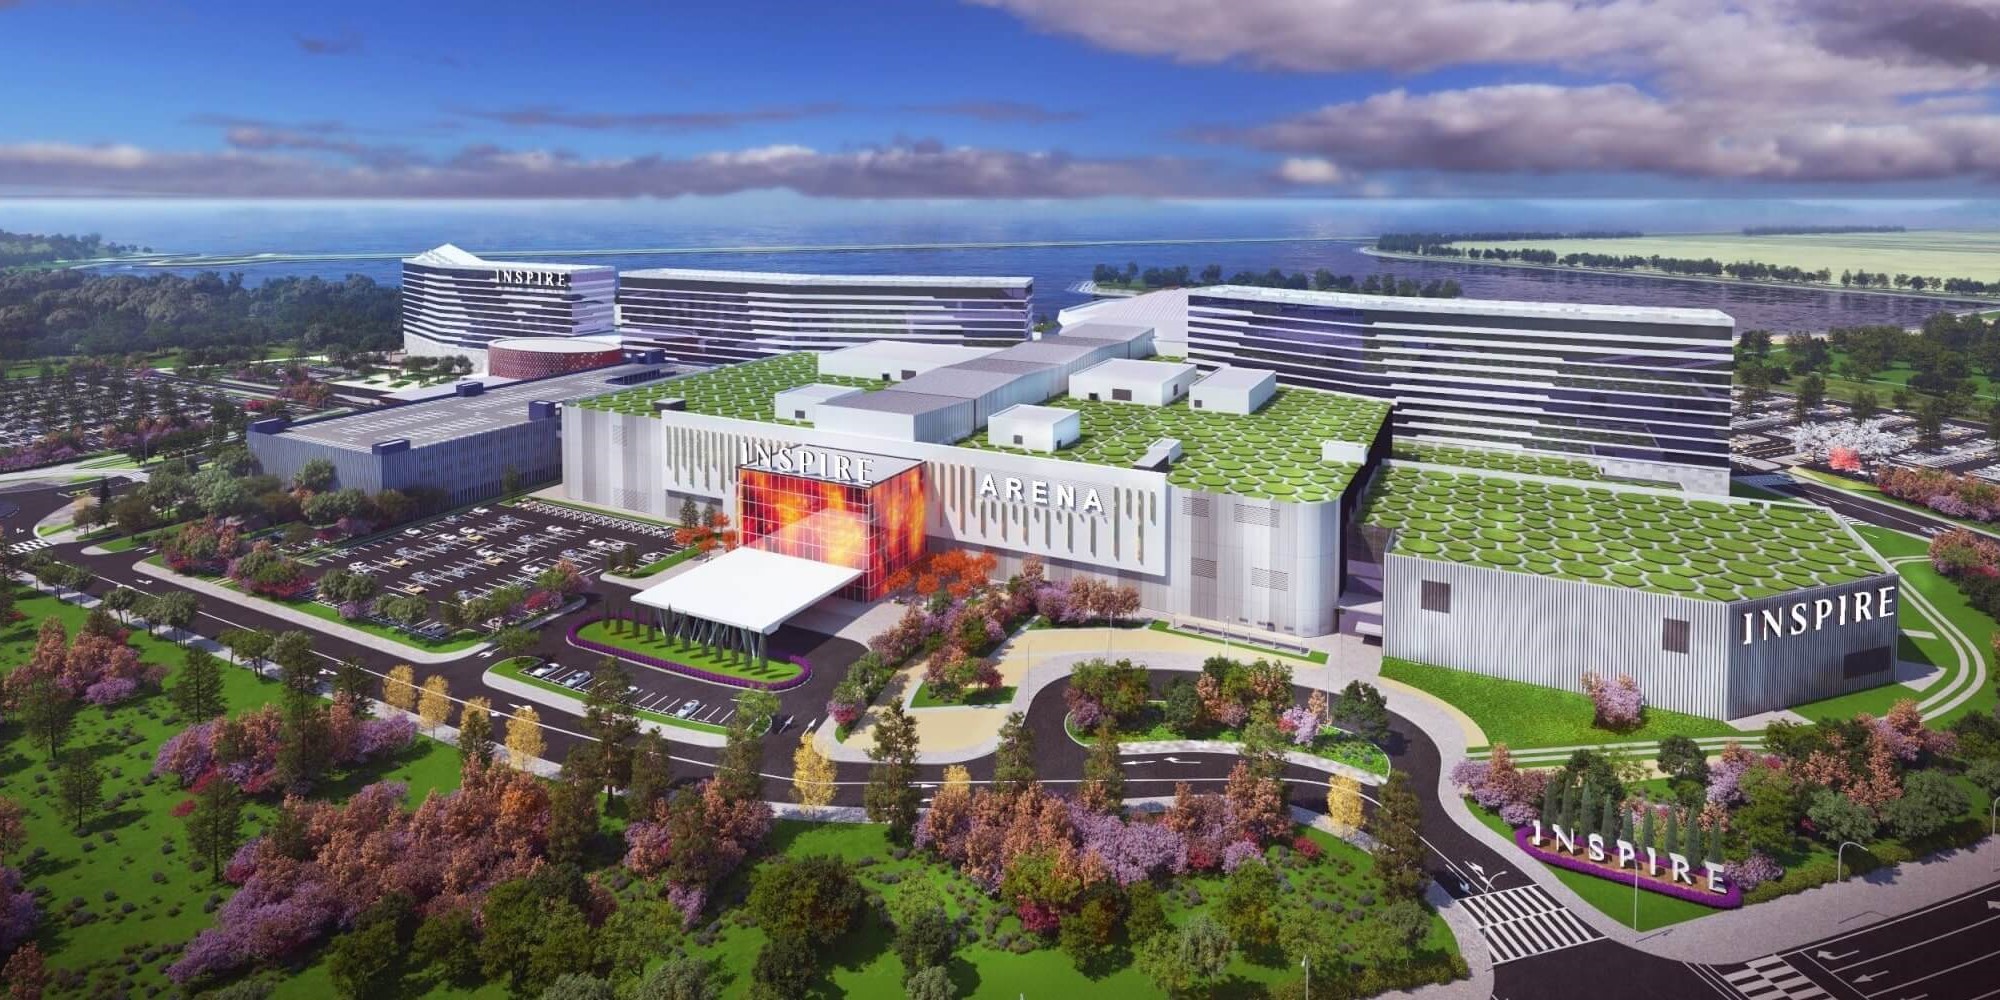 Mohegan Inspire to Open South Korea’s First Multipurpose Arena in 2023